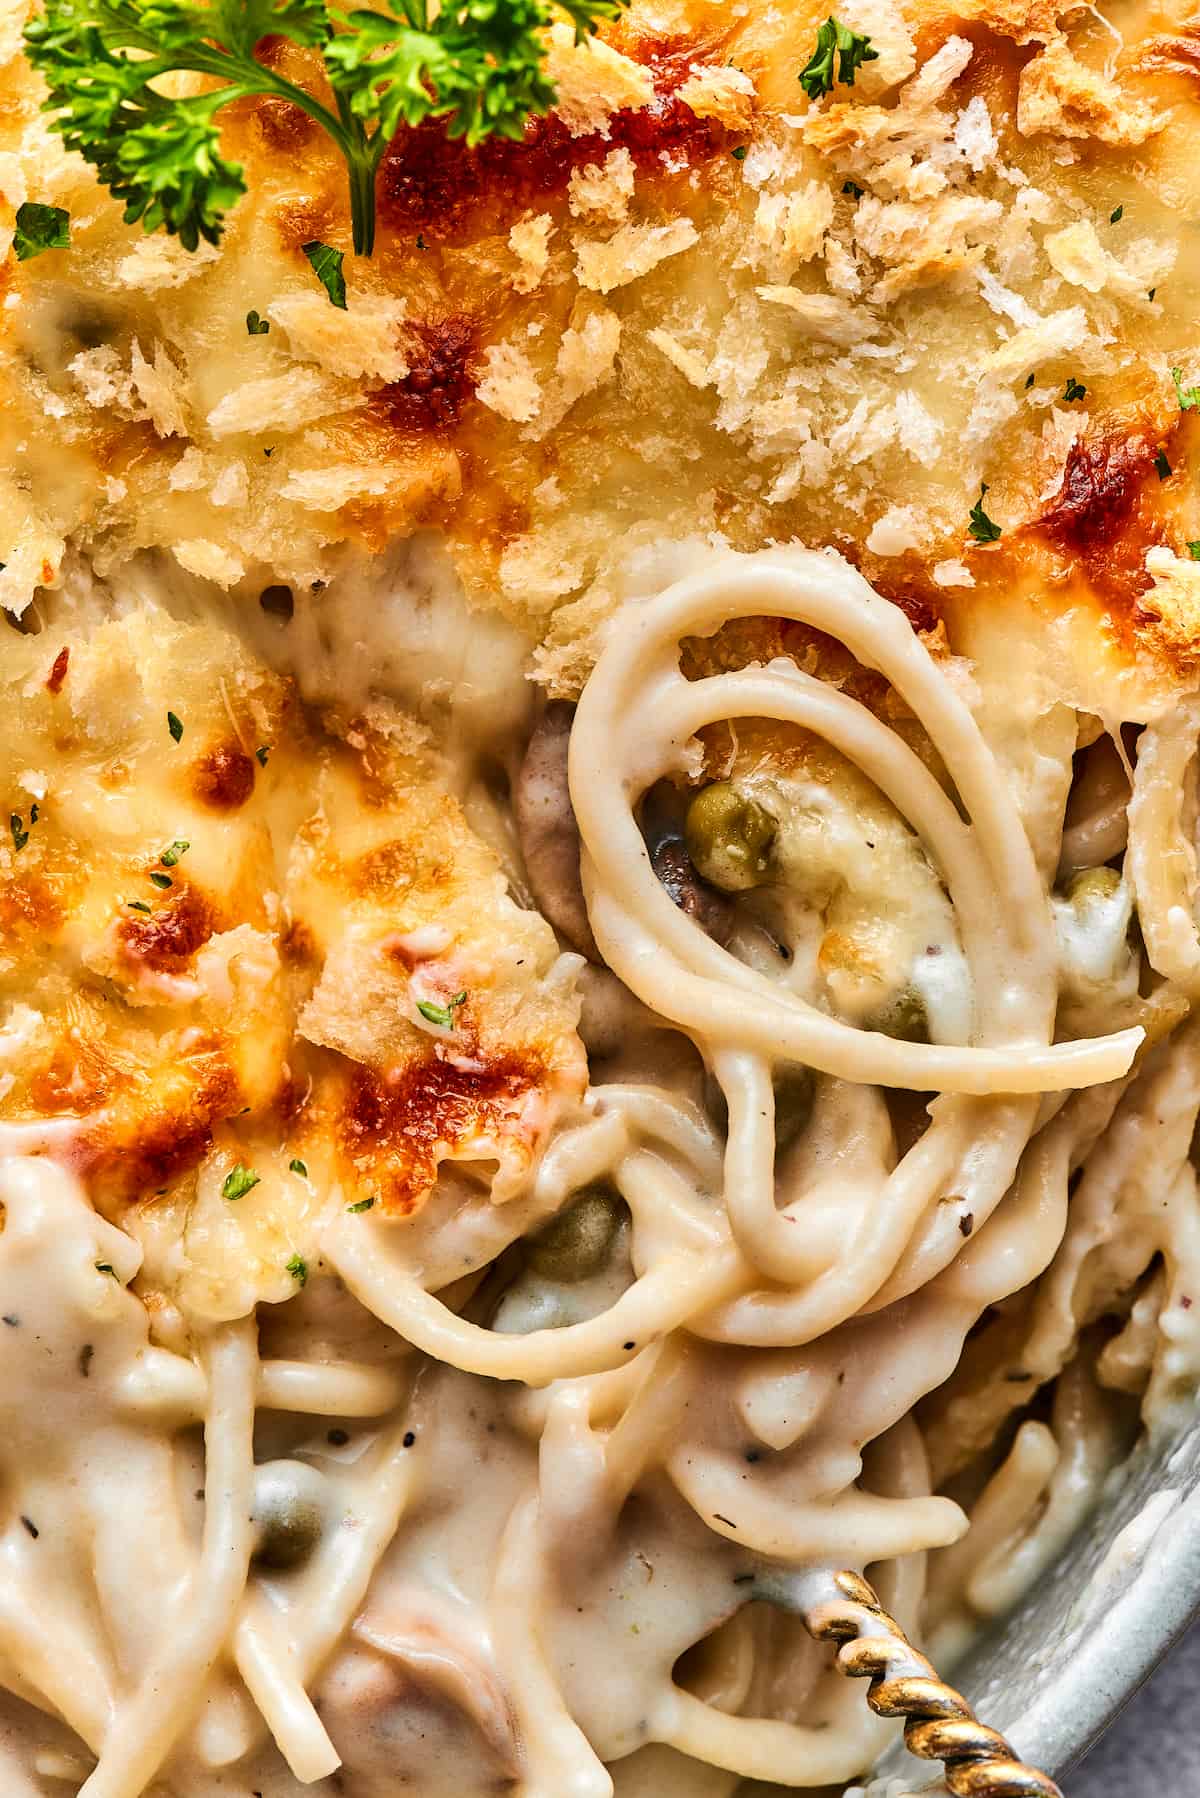 Close-up shot of chicken and creamy pasta with a melted cheese topping.